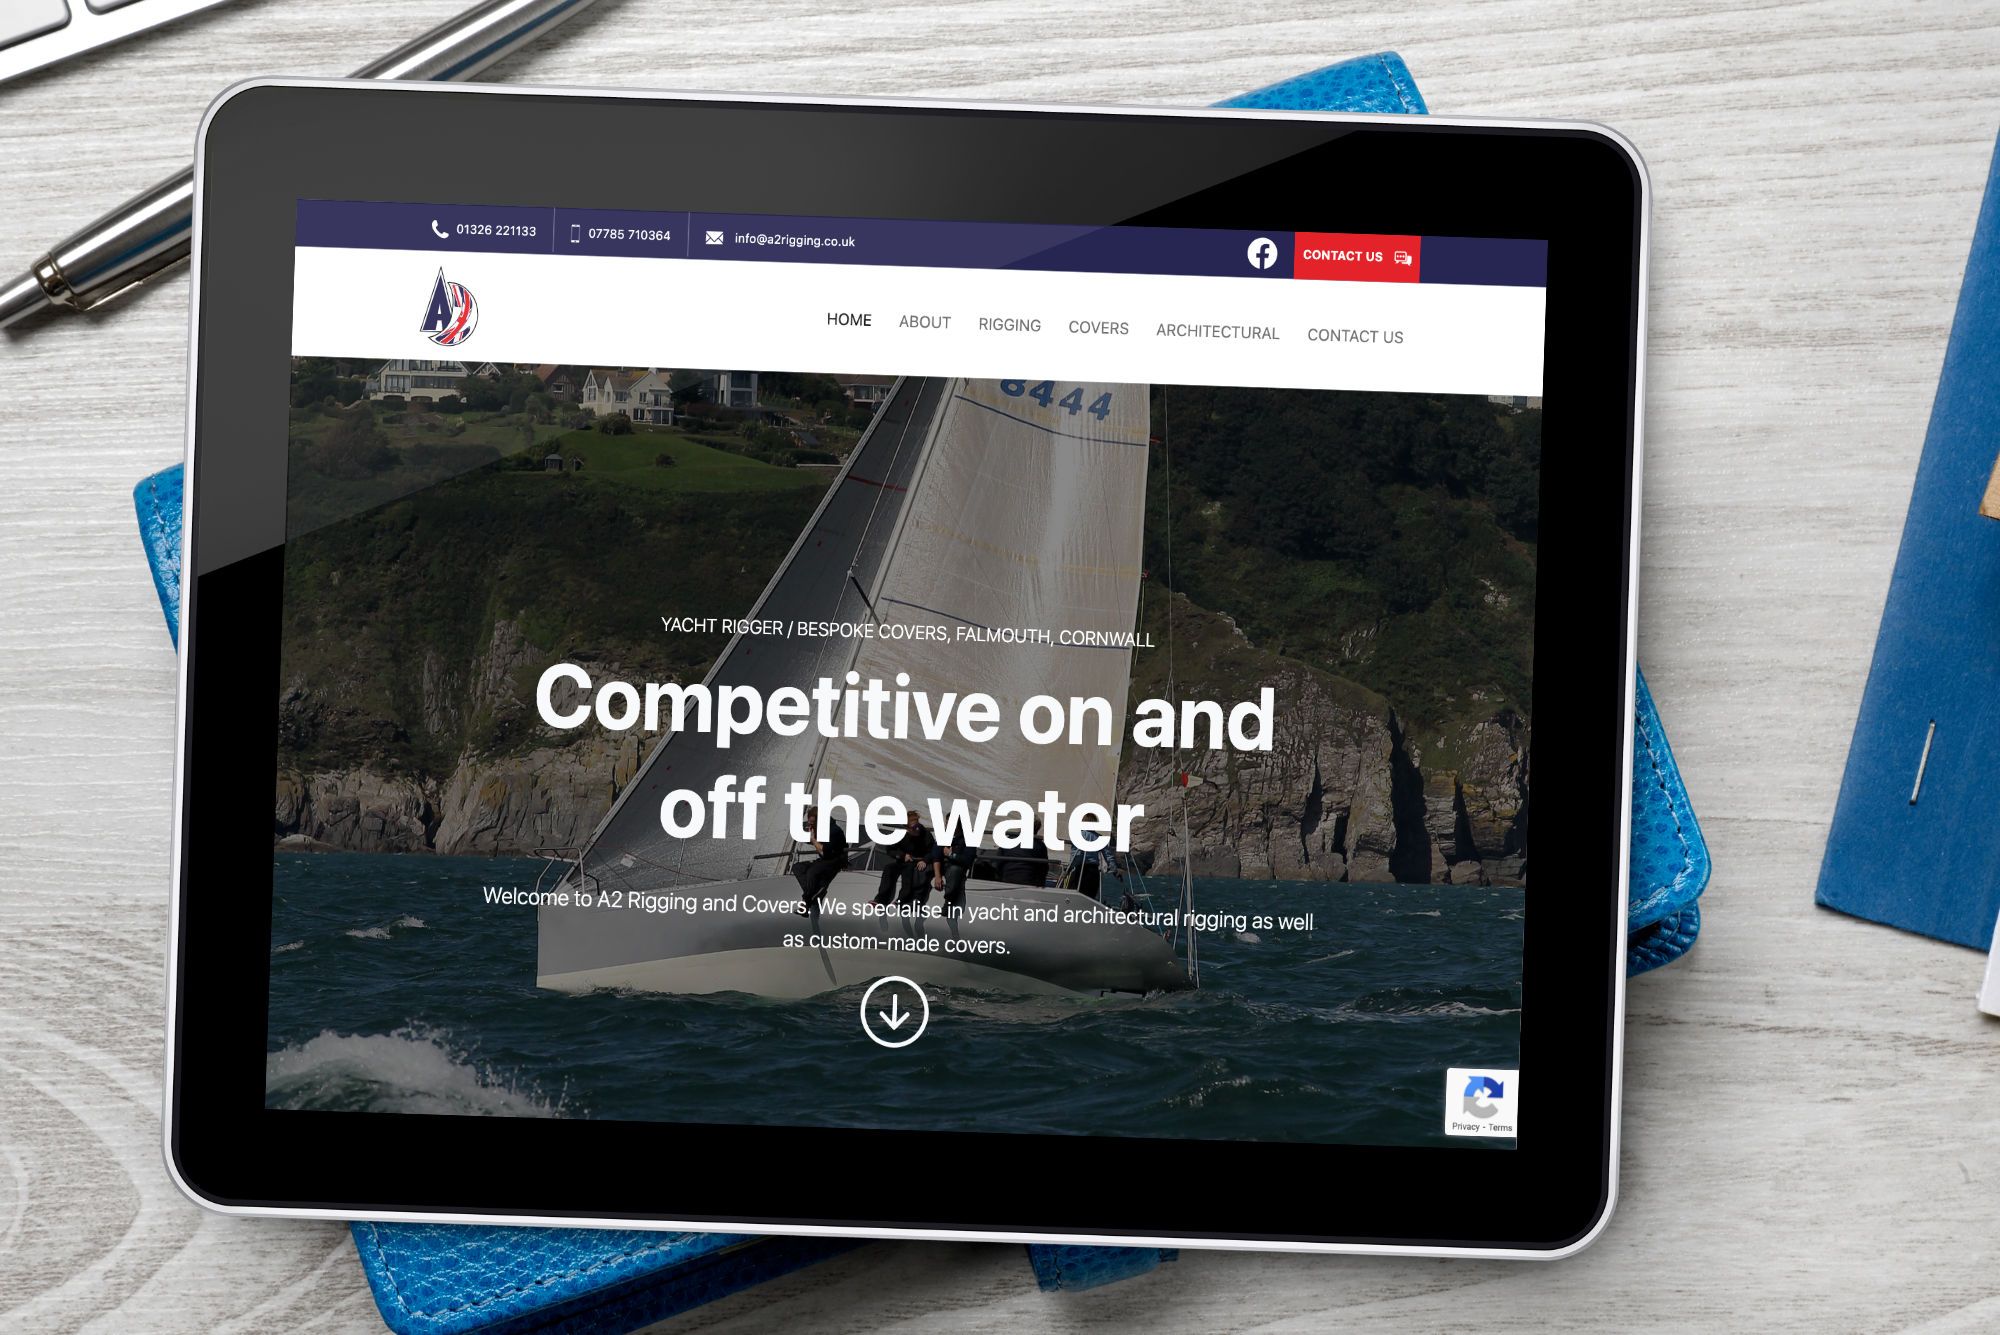 image of A2 Rigging website built with WordPress and LiveCanvas